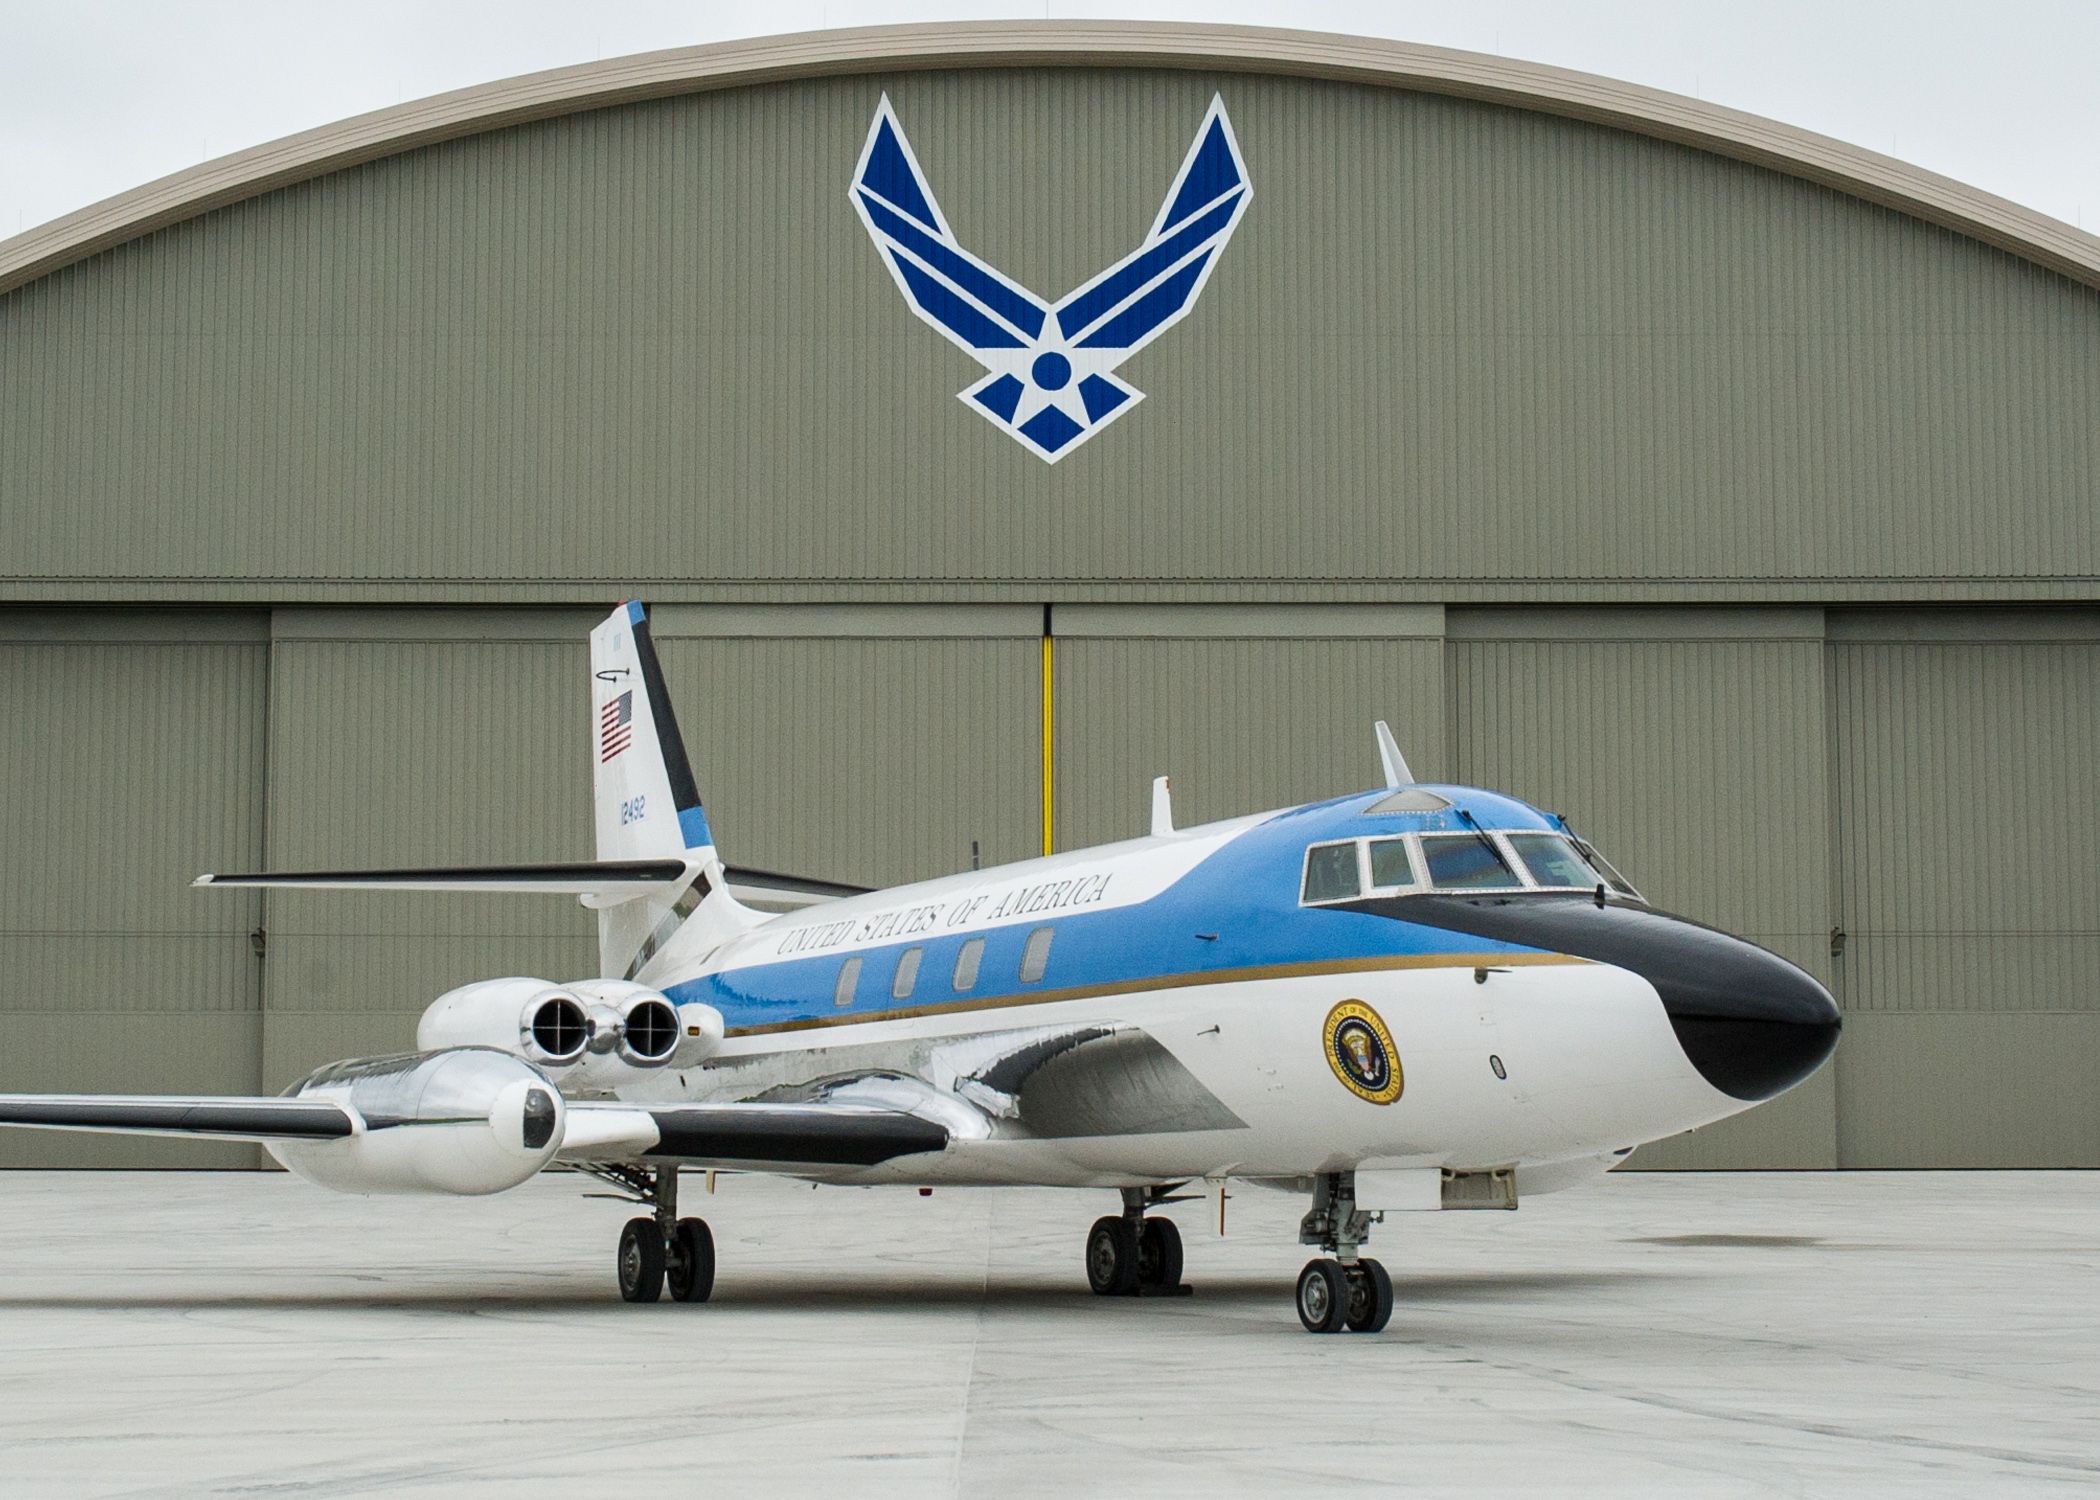 A US Air Force Lockheed Jetstar was standing in front of the hangar.